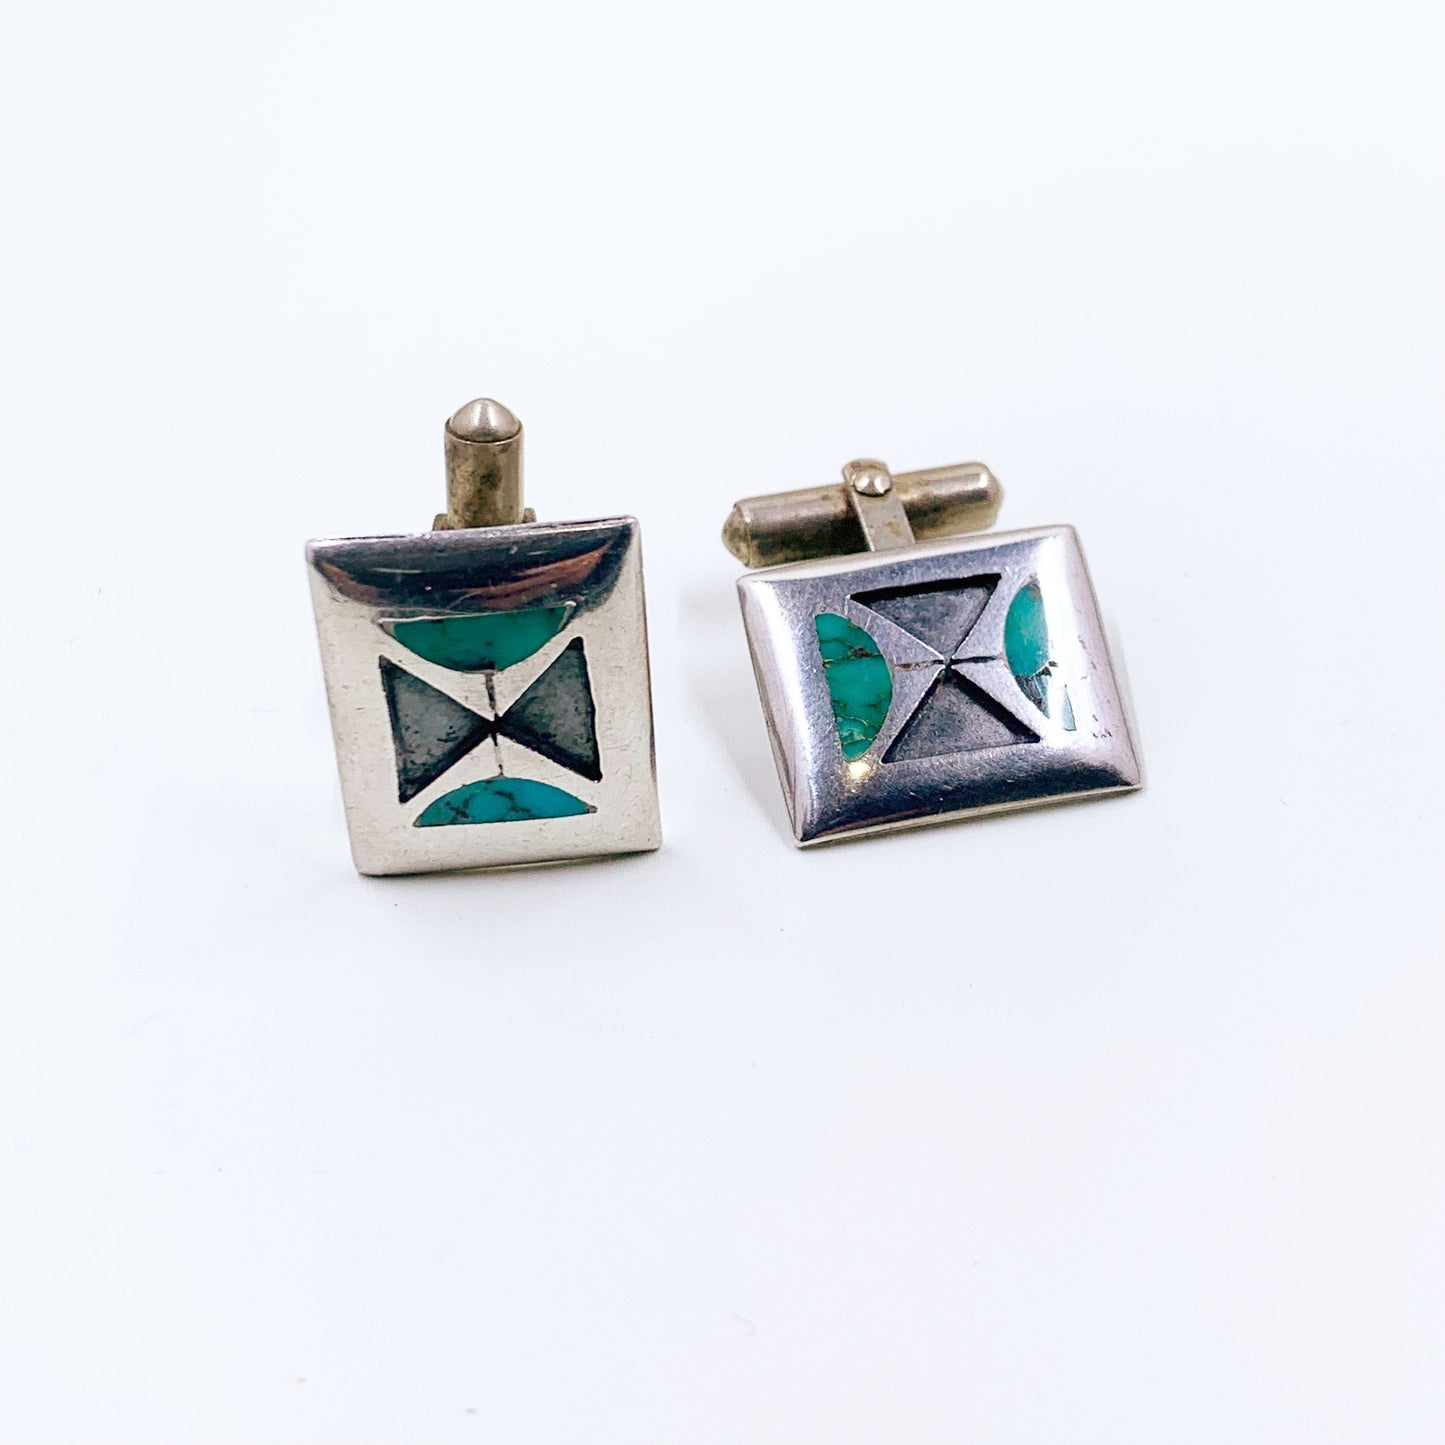 Vintage Silver and Turquoise Inlay Cufflinks | Vintage Modernist Silver Turquoise Cufflinks